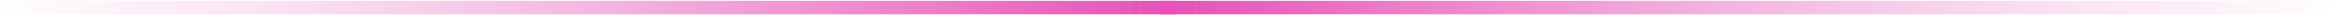 line pink.png